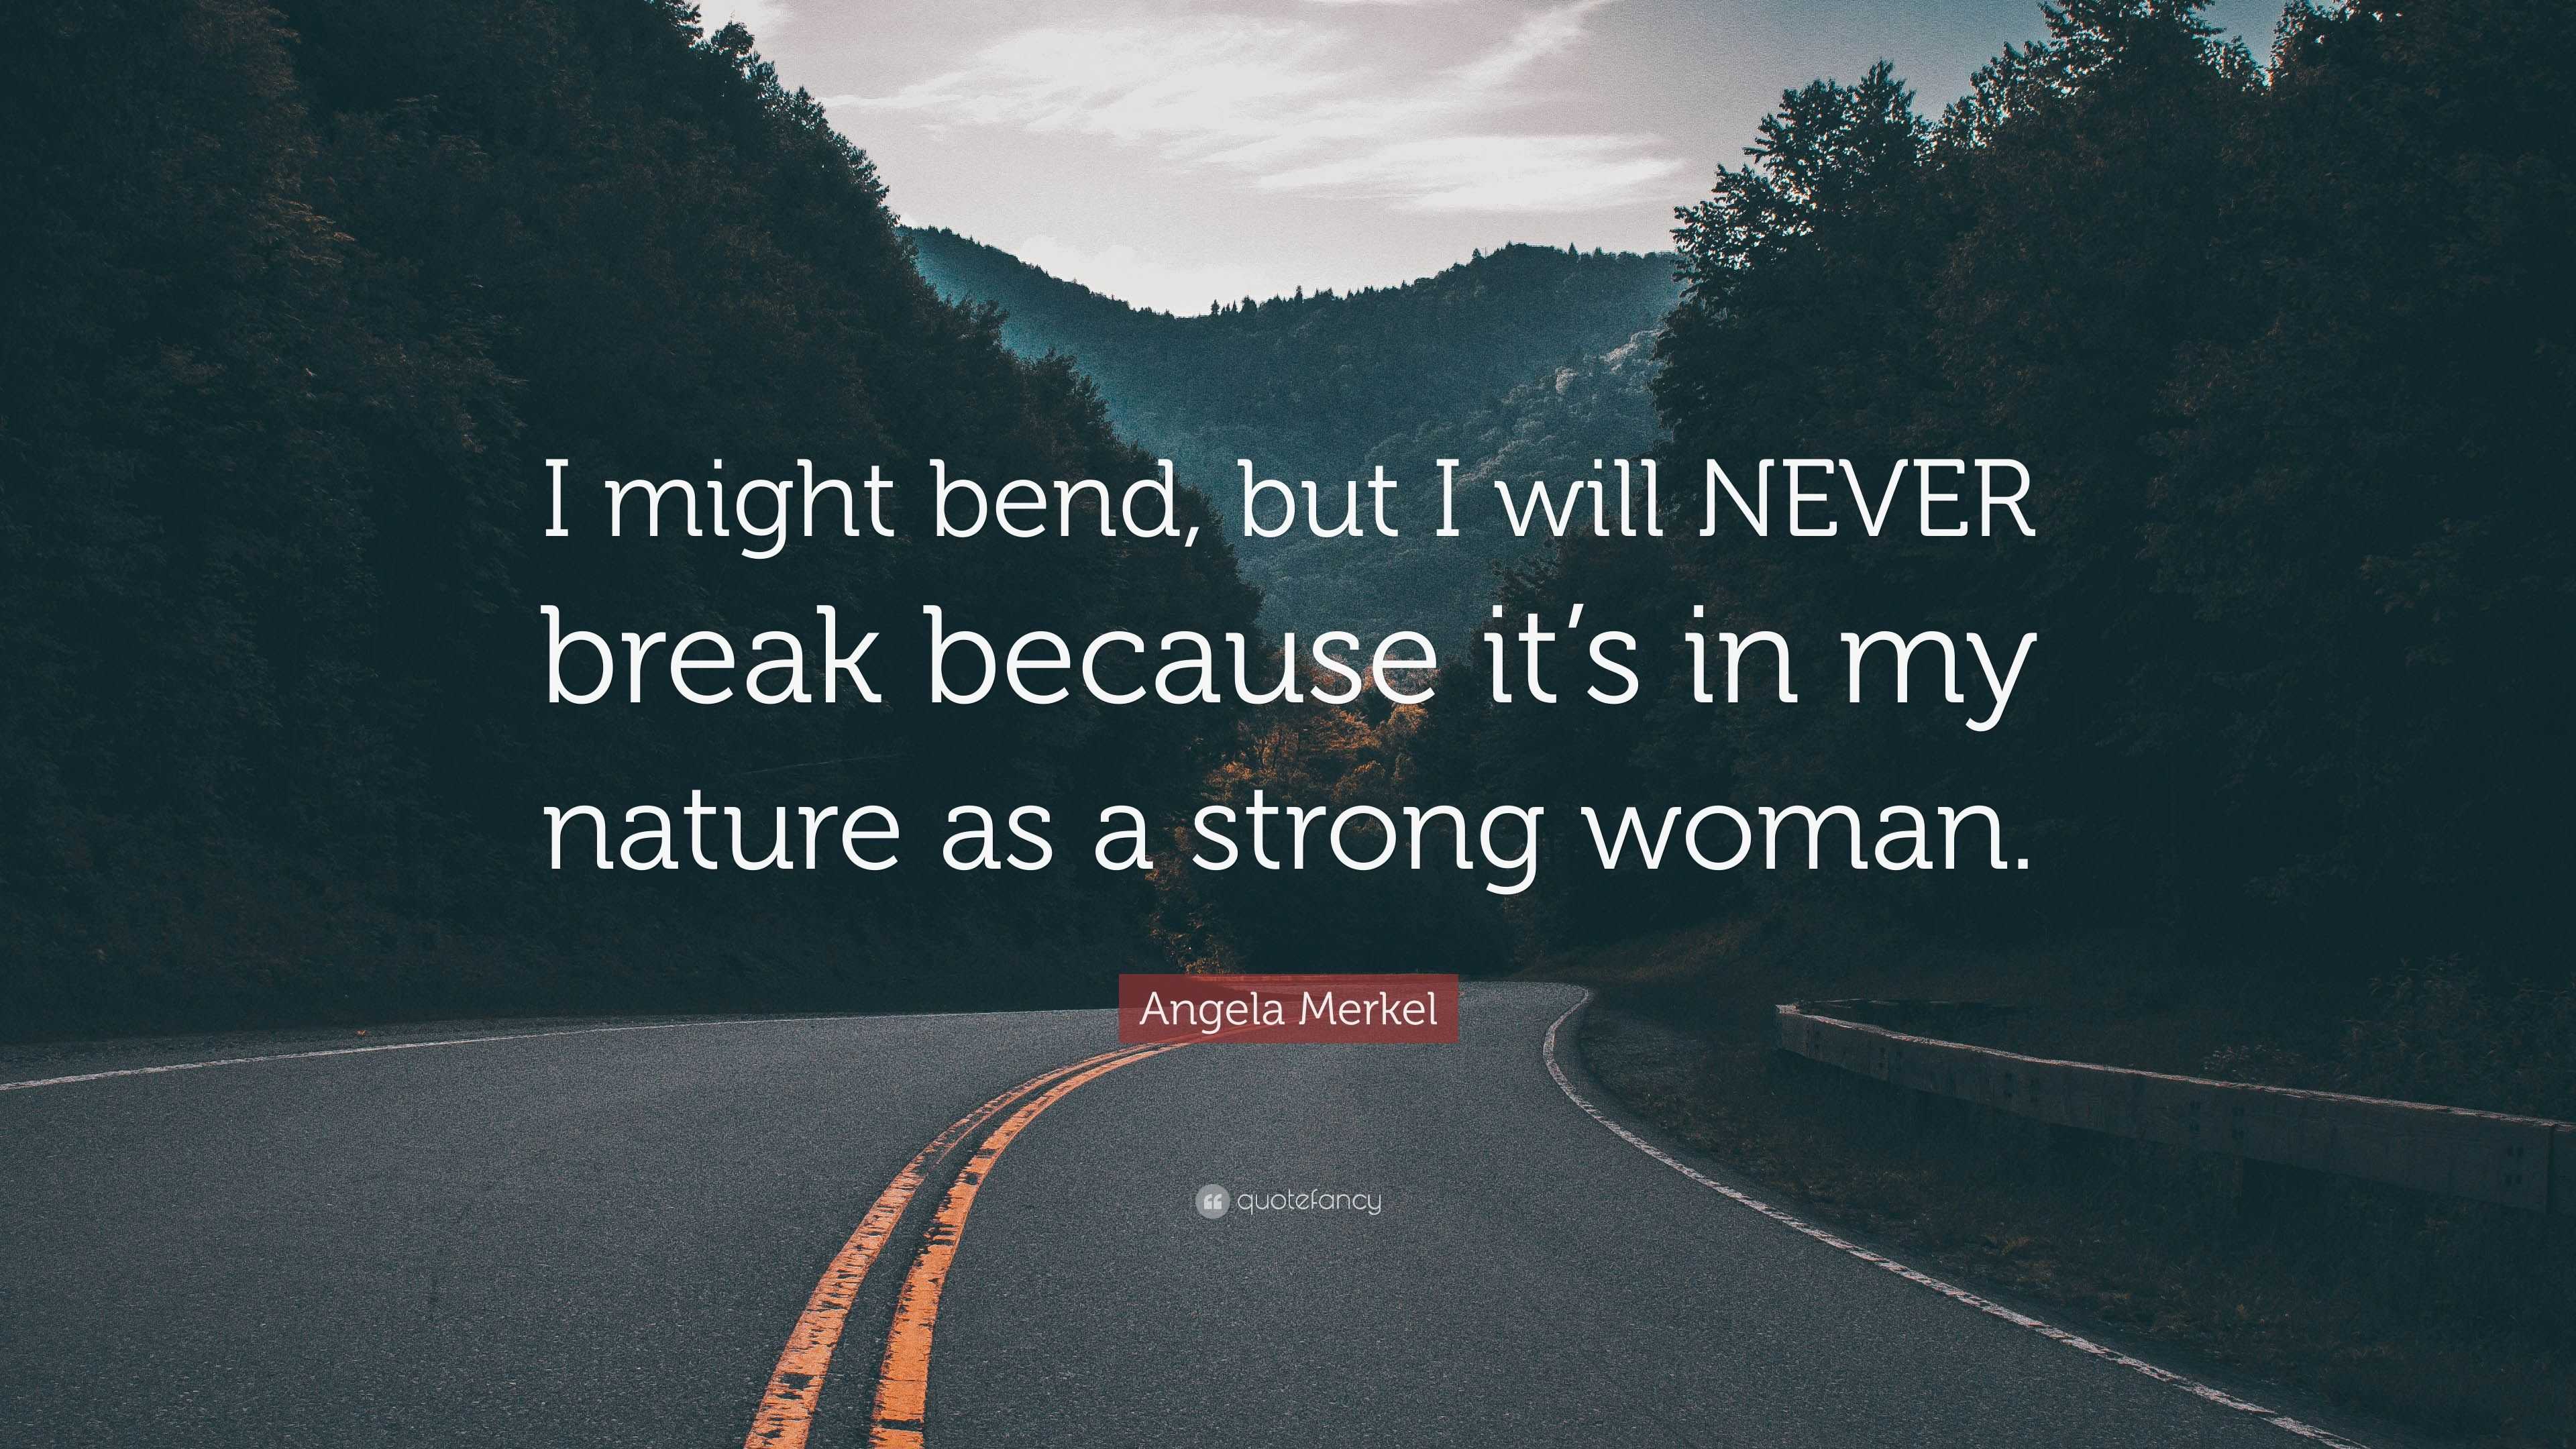 Angela Merkel Quote: “I might bend, but I will NEVER break because it’s ...